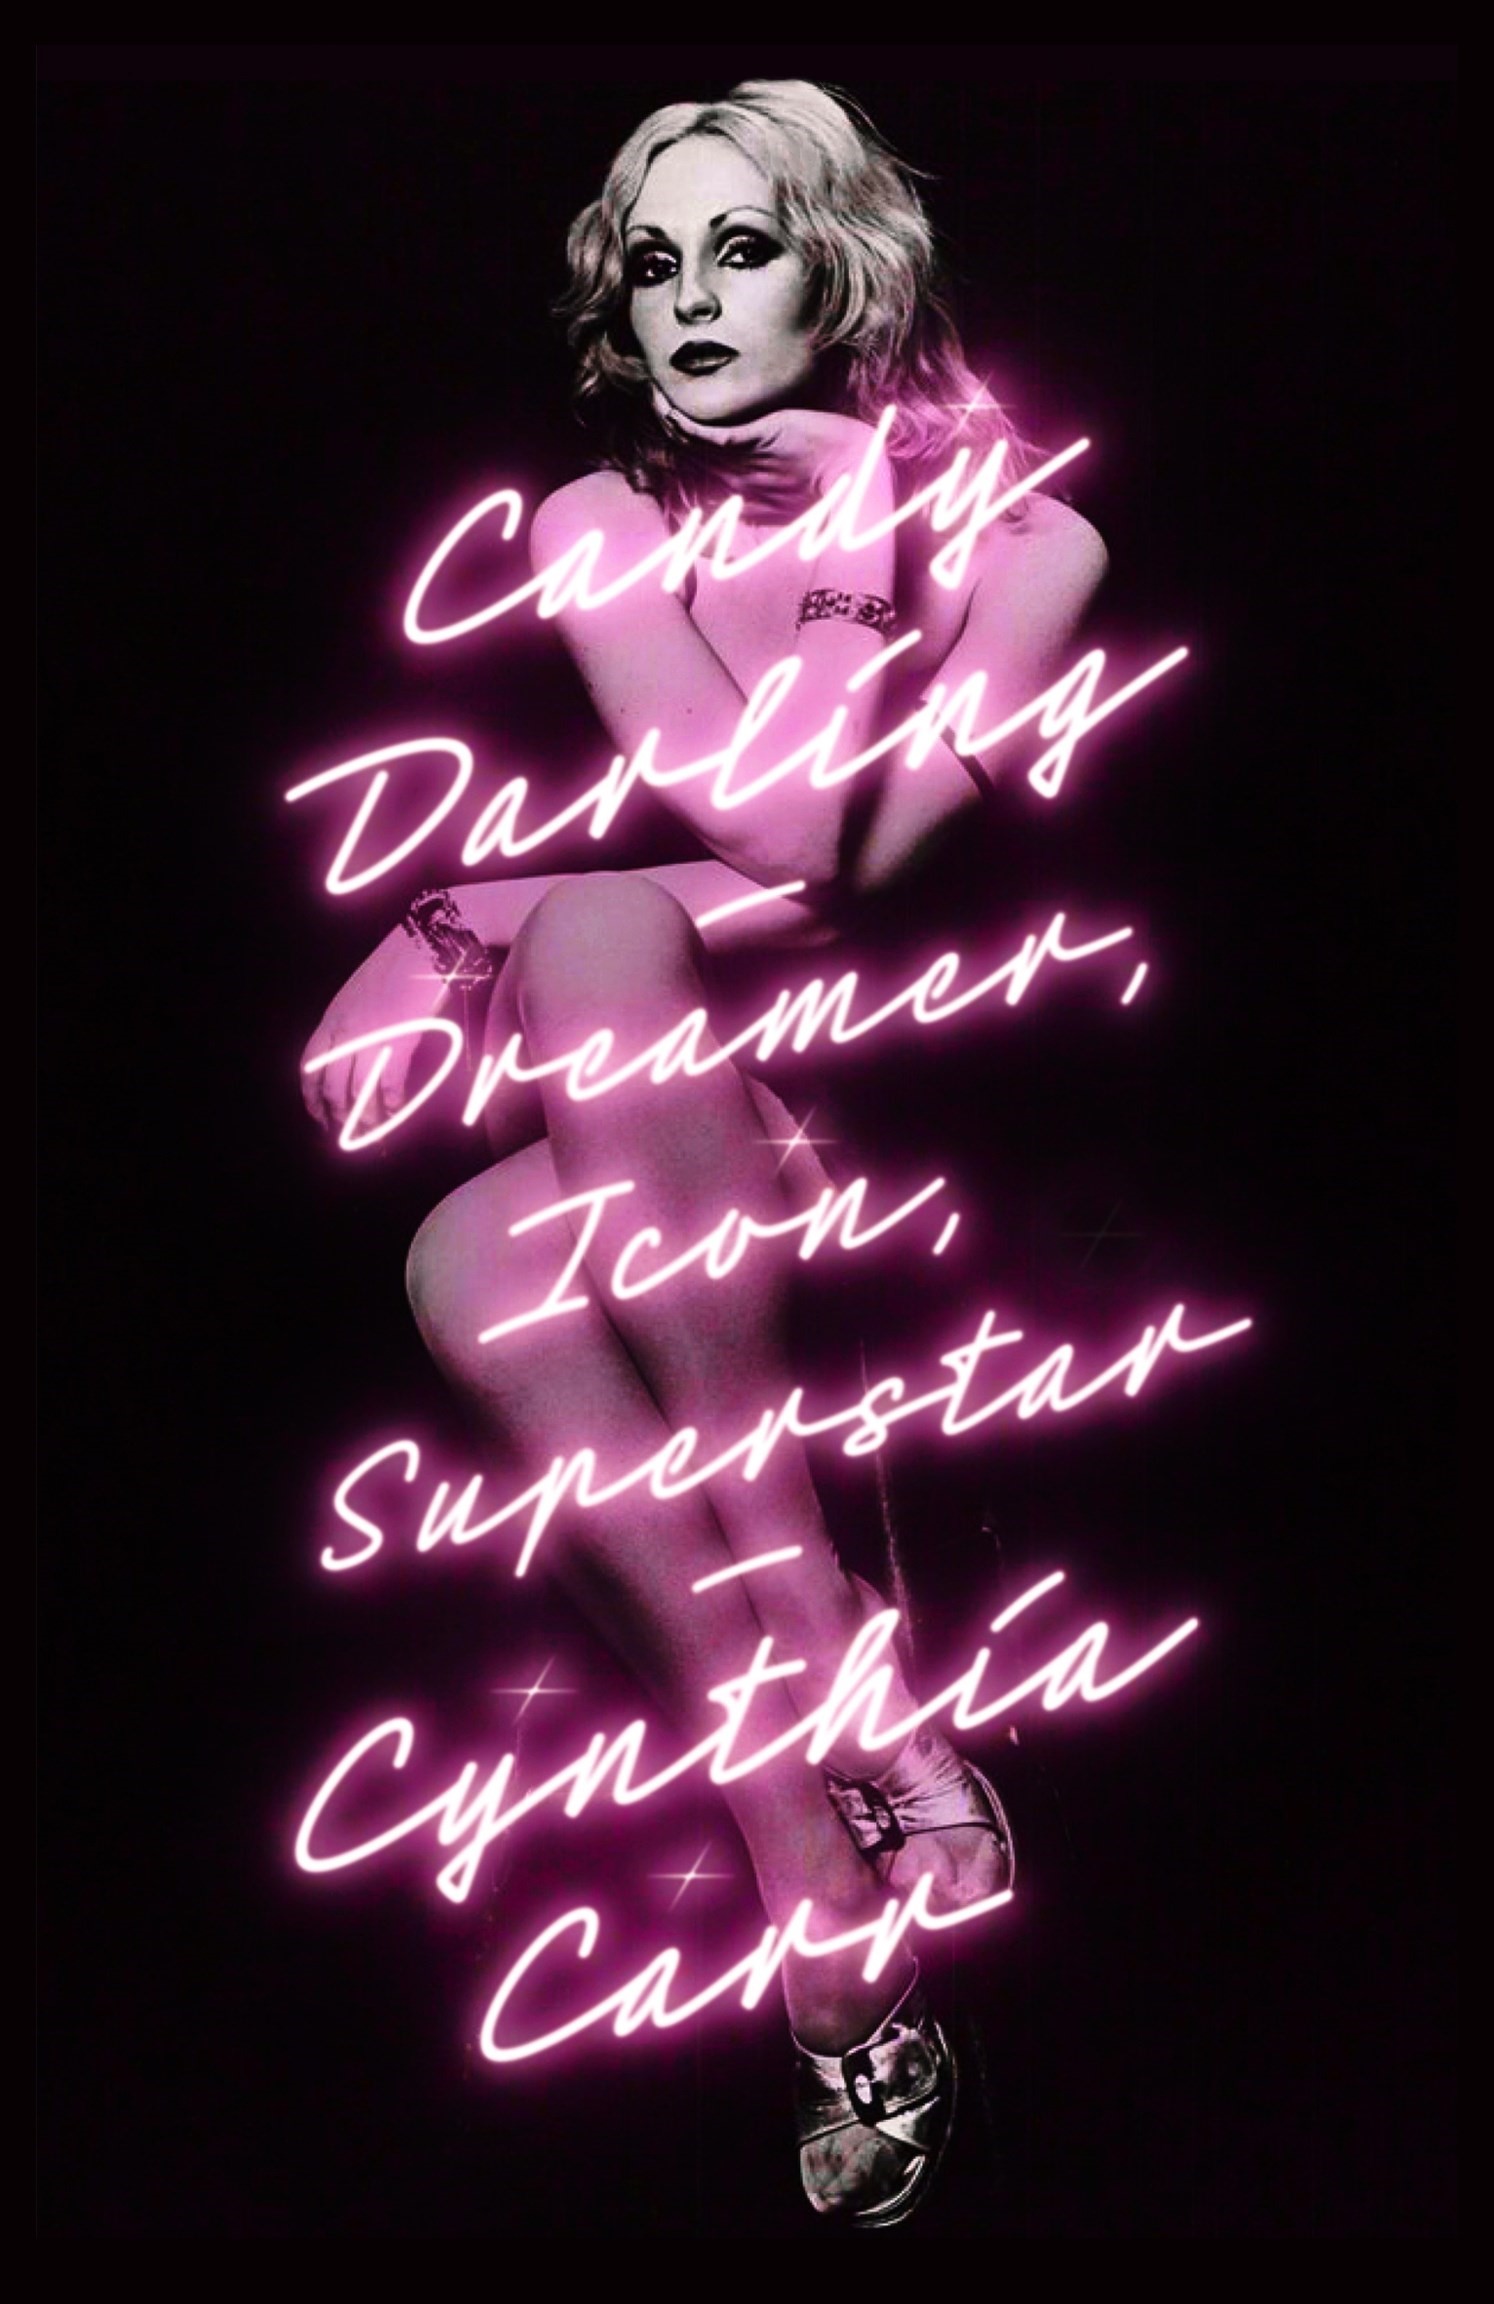 Candy Darling: Dreamer, Icon, Superstar by Cynthia Carr